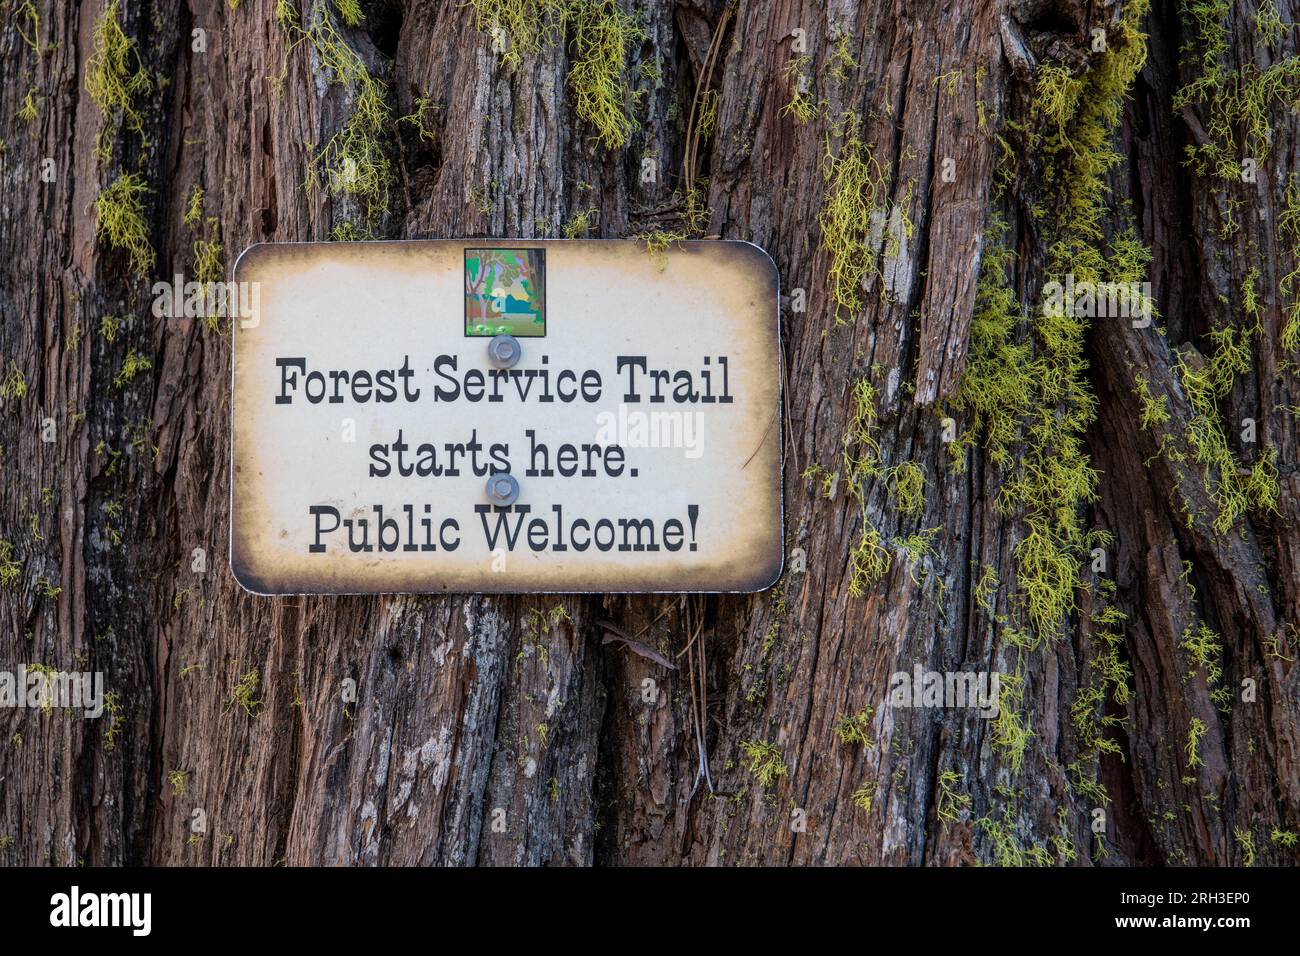 A sign telling hikers that the forest service trail starts here and that the public is welcome, in the Sierra Nevada Mountains, California. Stock Photo